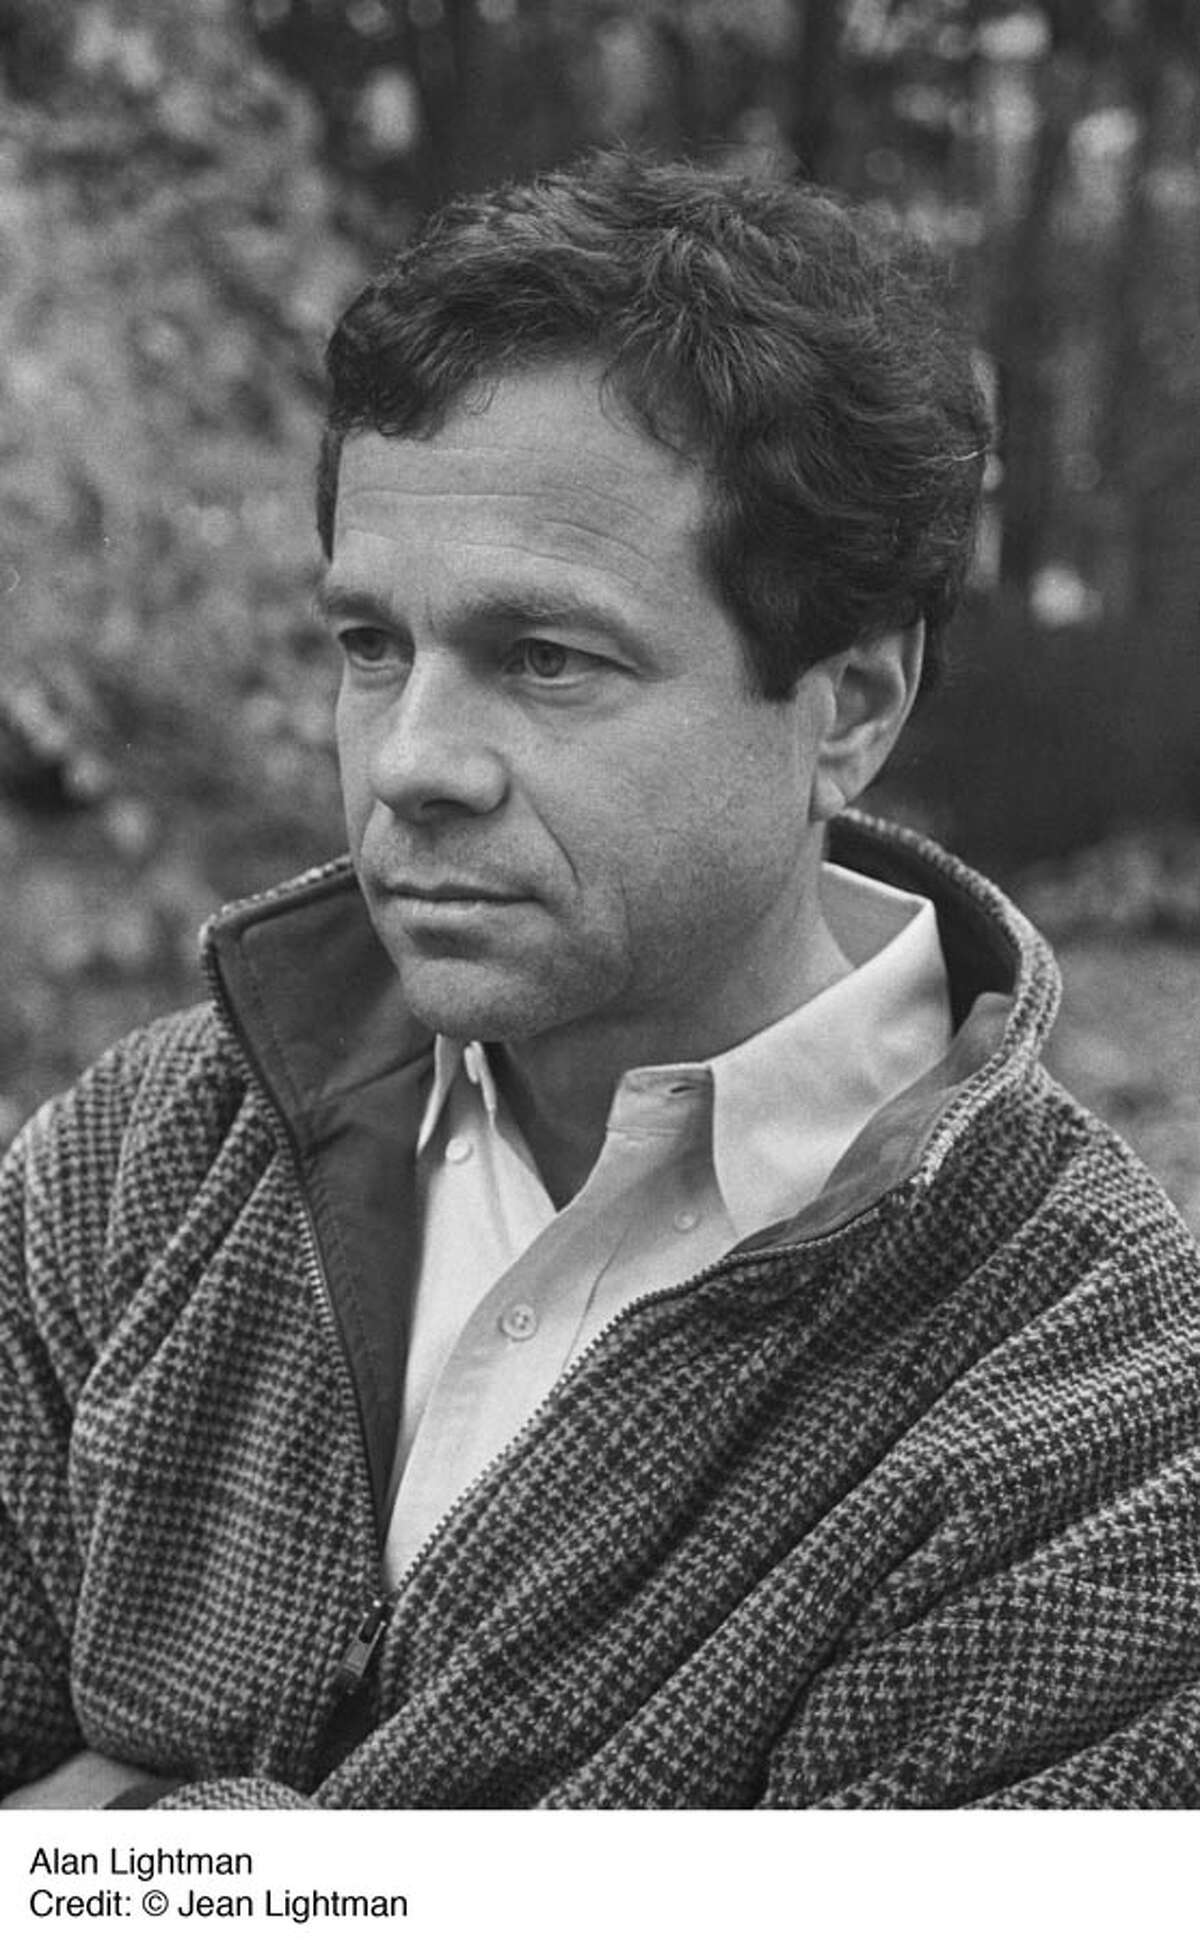 Alan Lightman, author of "Mr. g: A Novel About the Creation" (2012) 